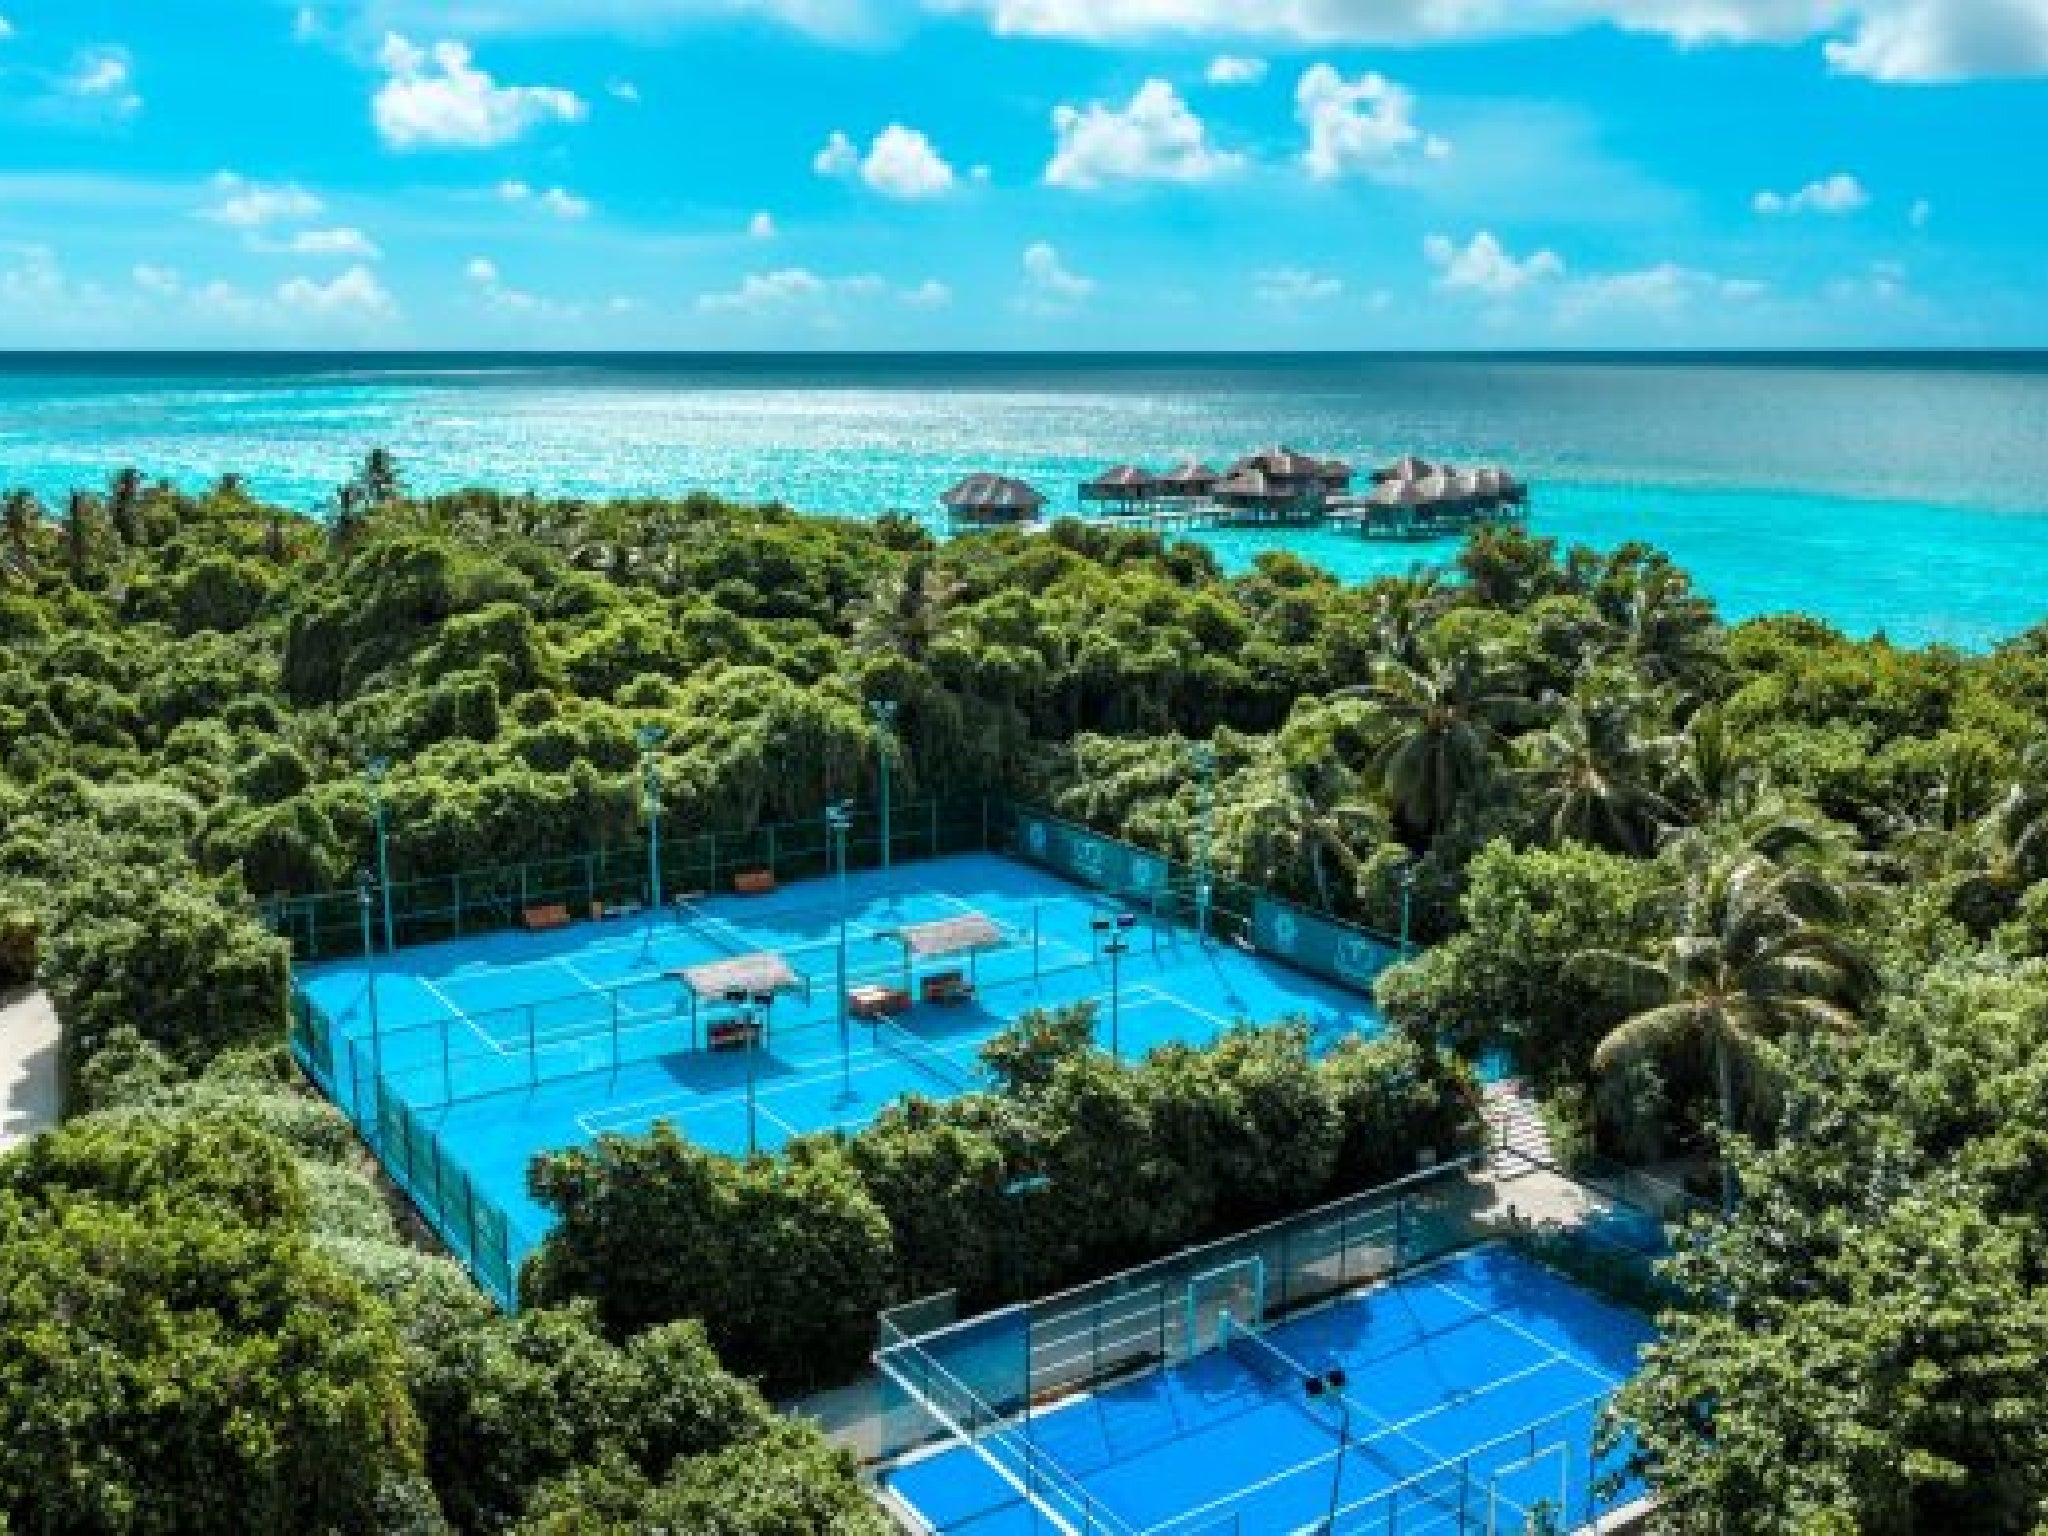 Play on a world-class surface in the Maldives